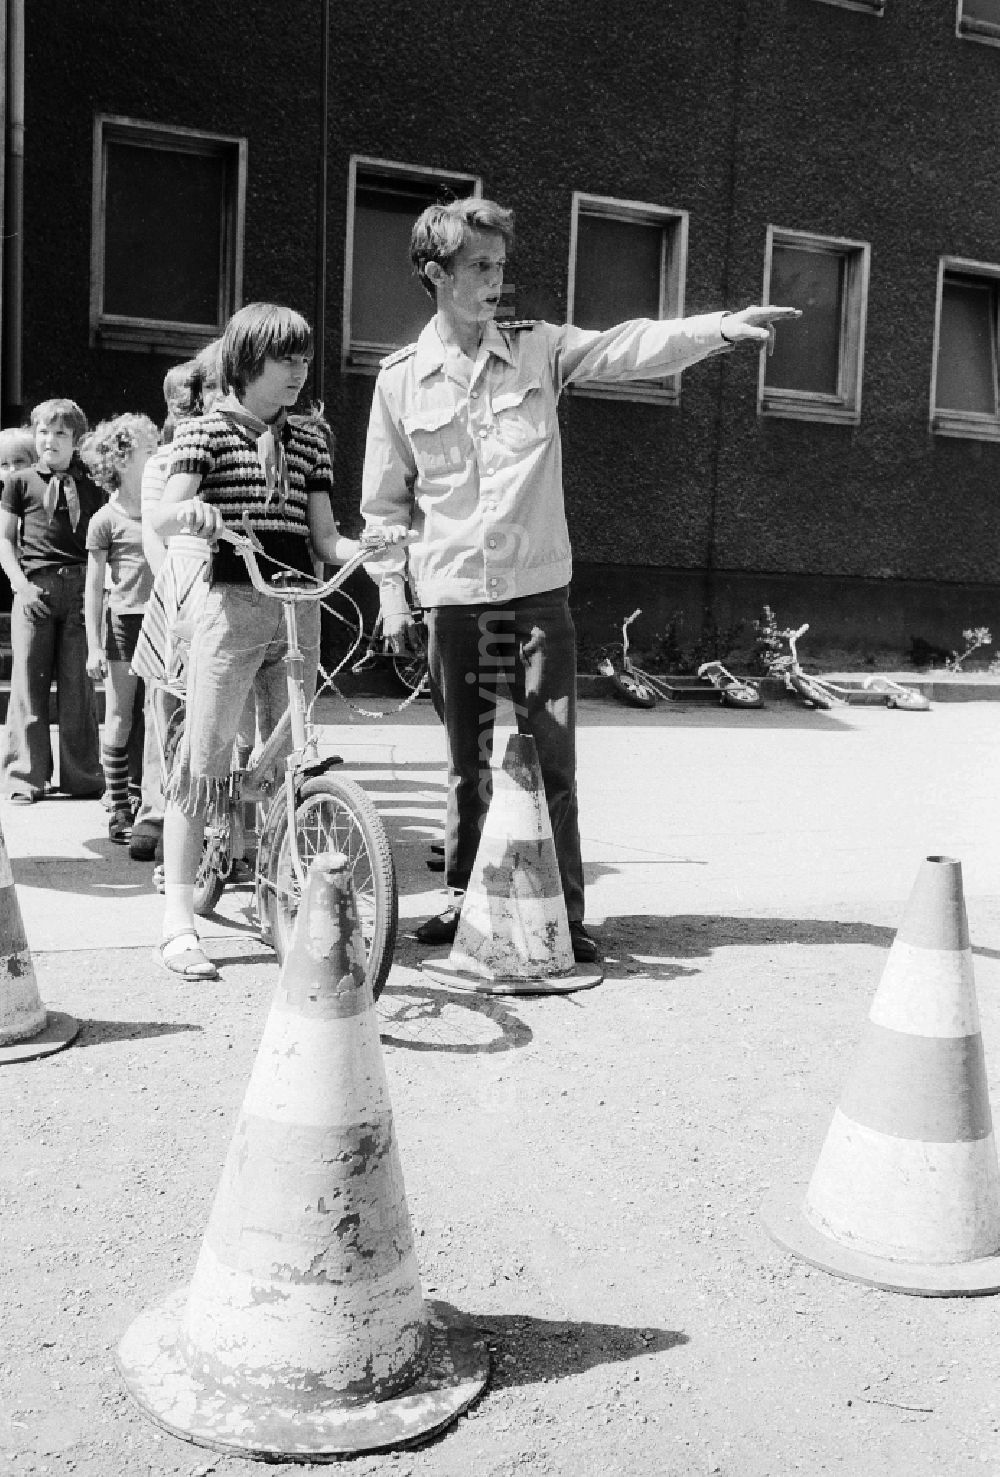 GDR photo archive: Berlin - Schoolgirls and schoolboys with the road safety education in the holiday's plays / hoard on the summer holidays in Berlin, the former capital of the GDR, German democratic republic. The holiday's plays were intended mainly for schoolboys first to the fourth class